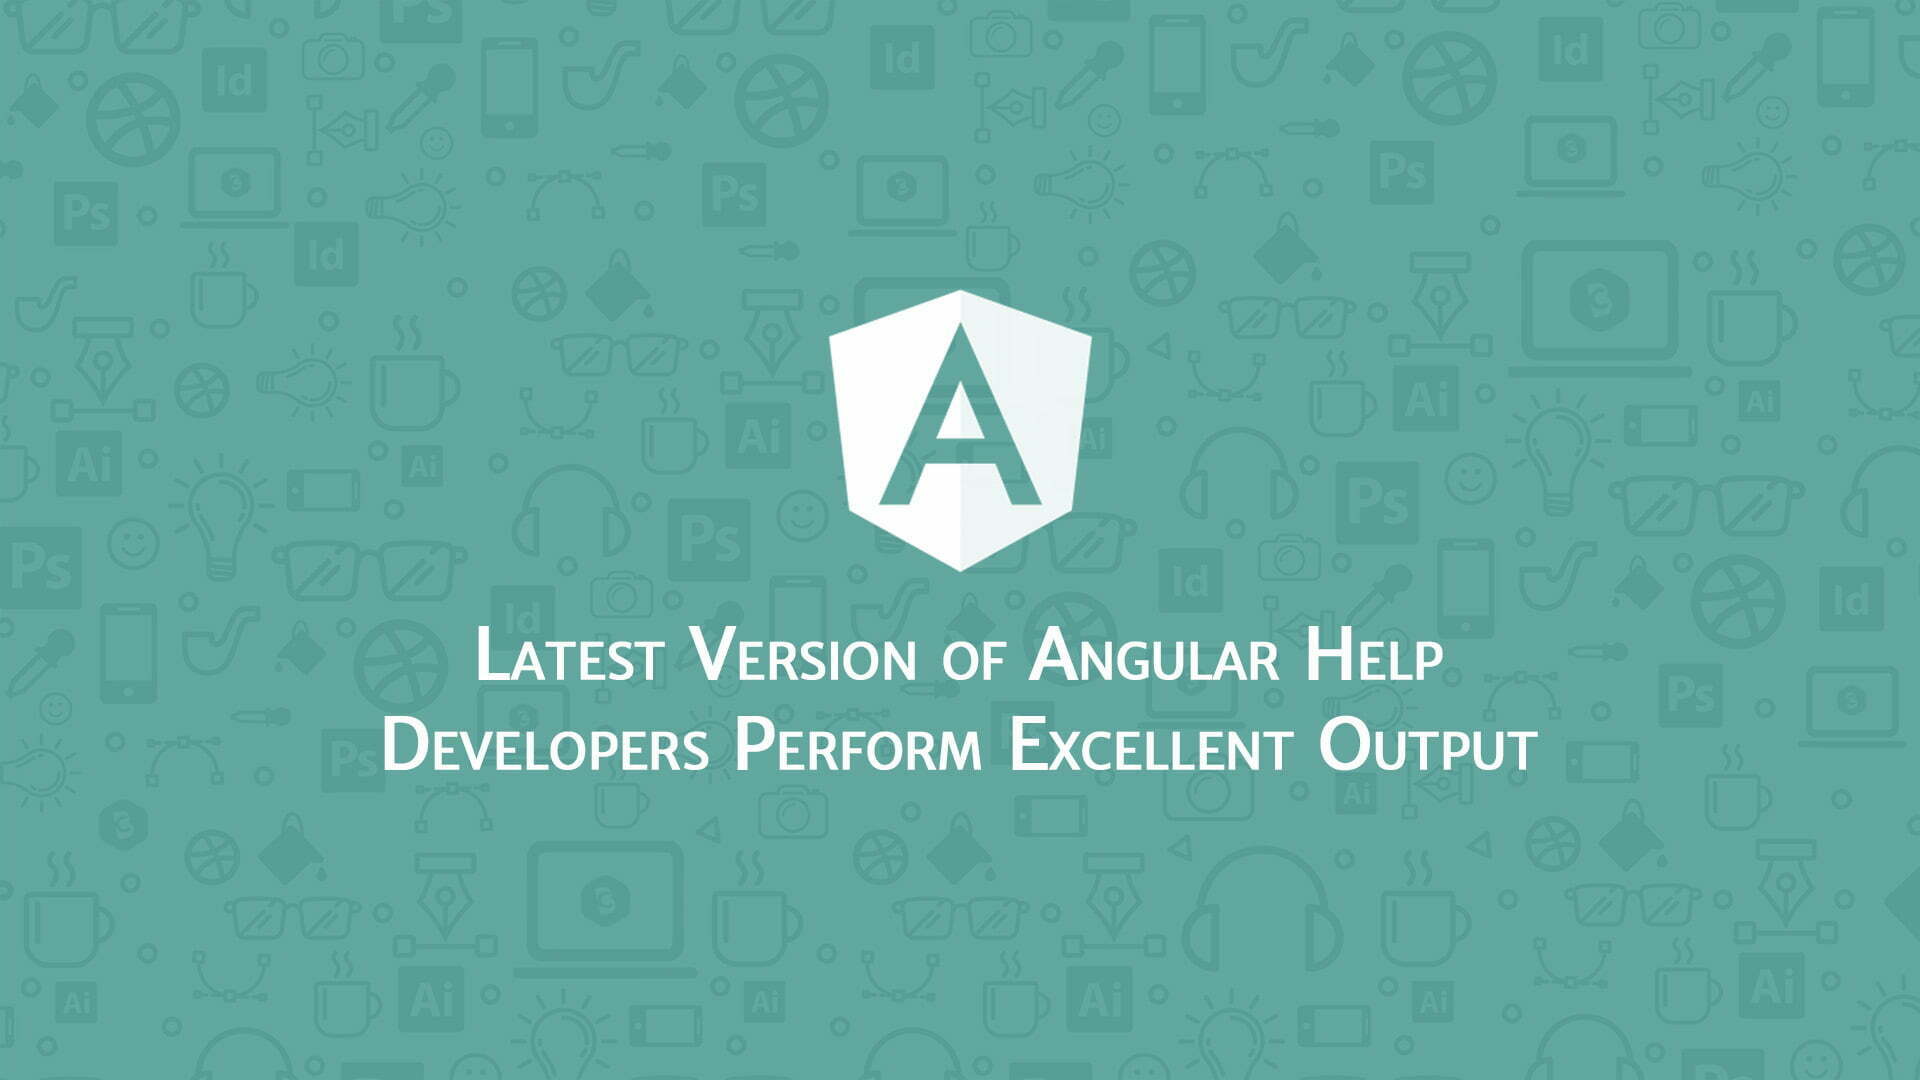 Latest Version of Angular Help Developers Perform Excellent Output